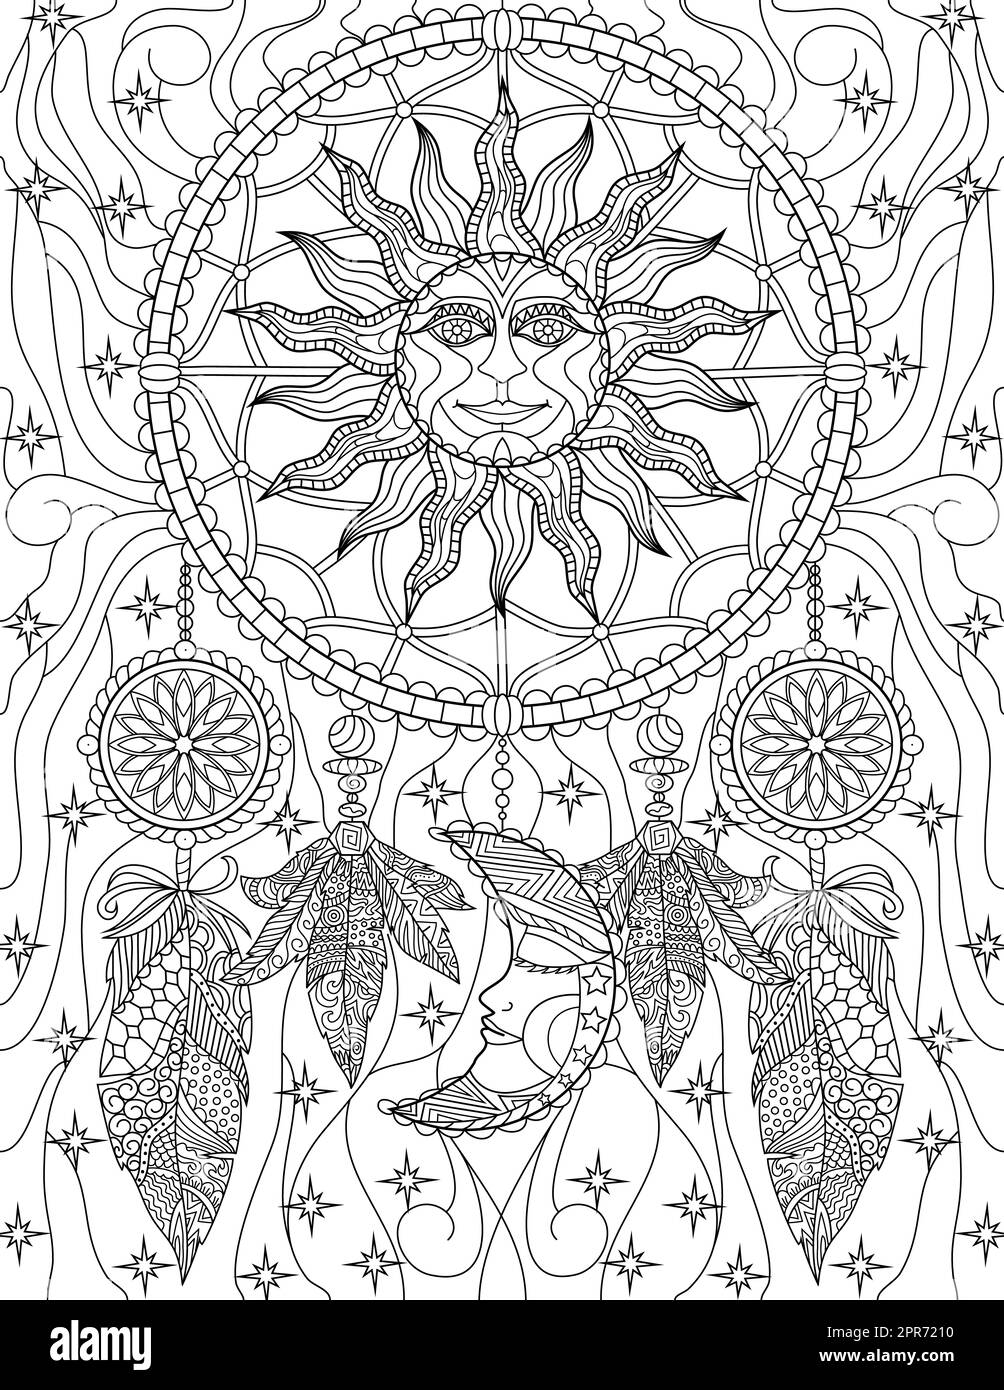 Coloring Book Page With Dreamcatcher With Sun And Moon Details. Sheet To Be Colored With Handmade Willow Hoop With Hanging Feathers And Glowing Background. Stock Photo